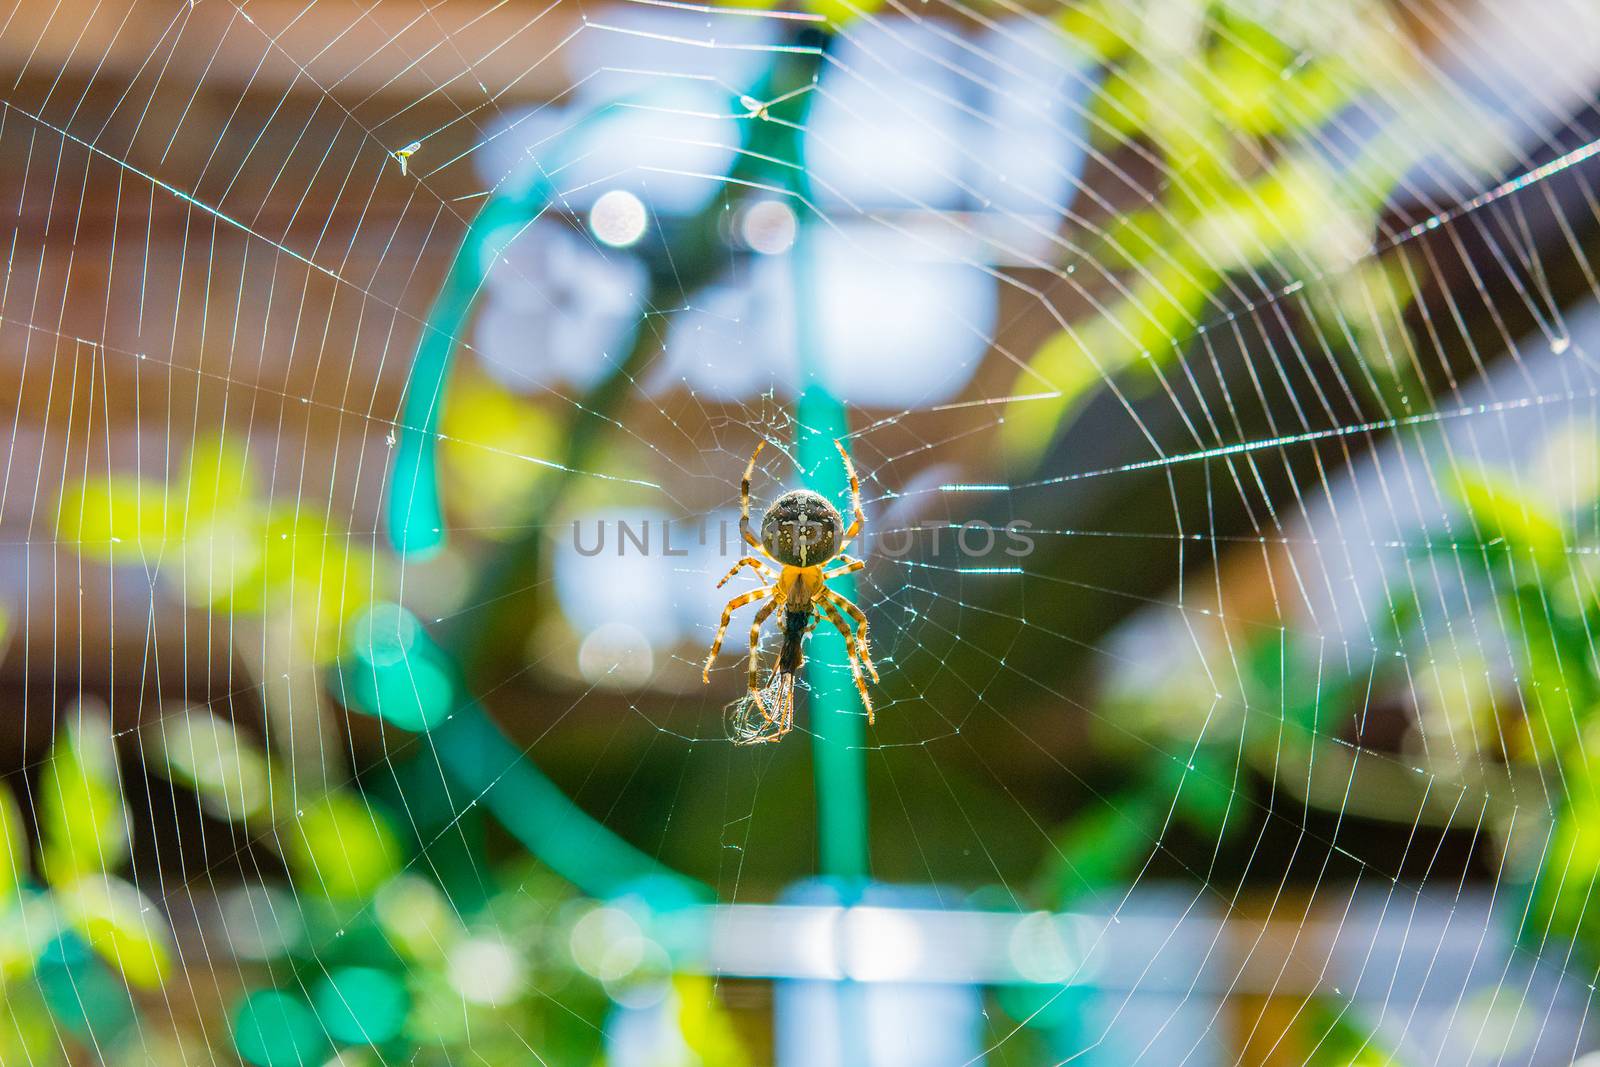 Cross spider with prey in the center of its web by ben44